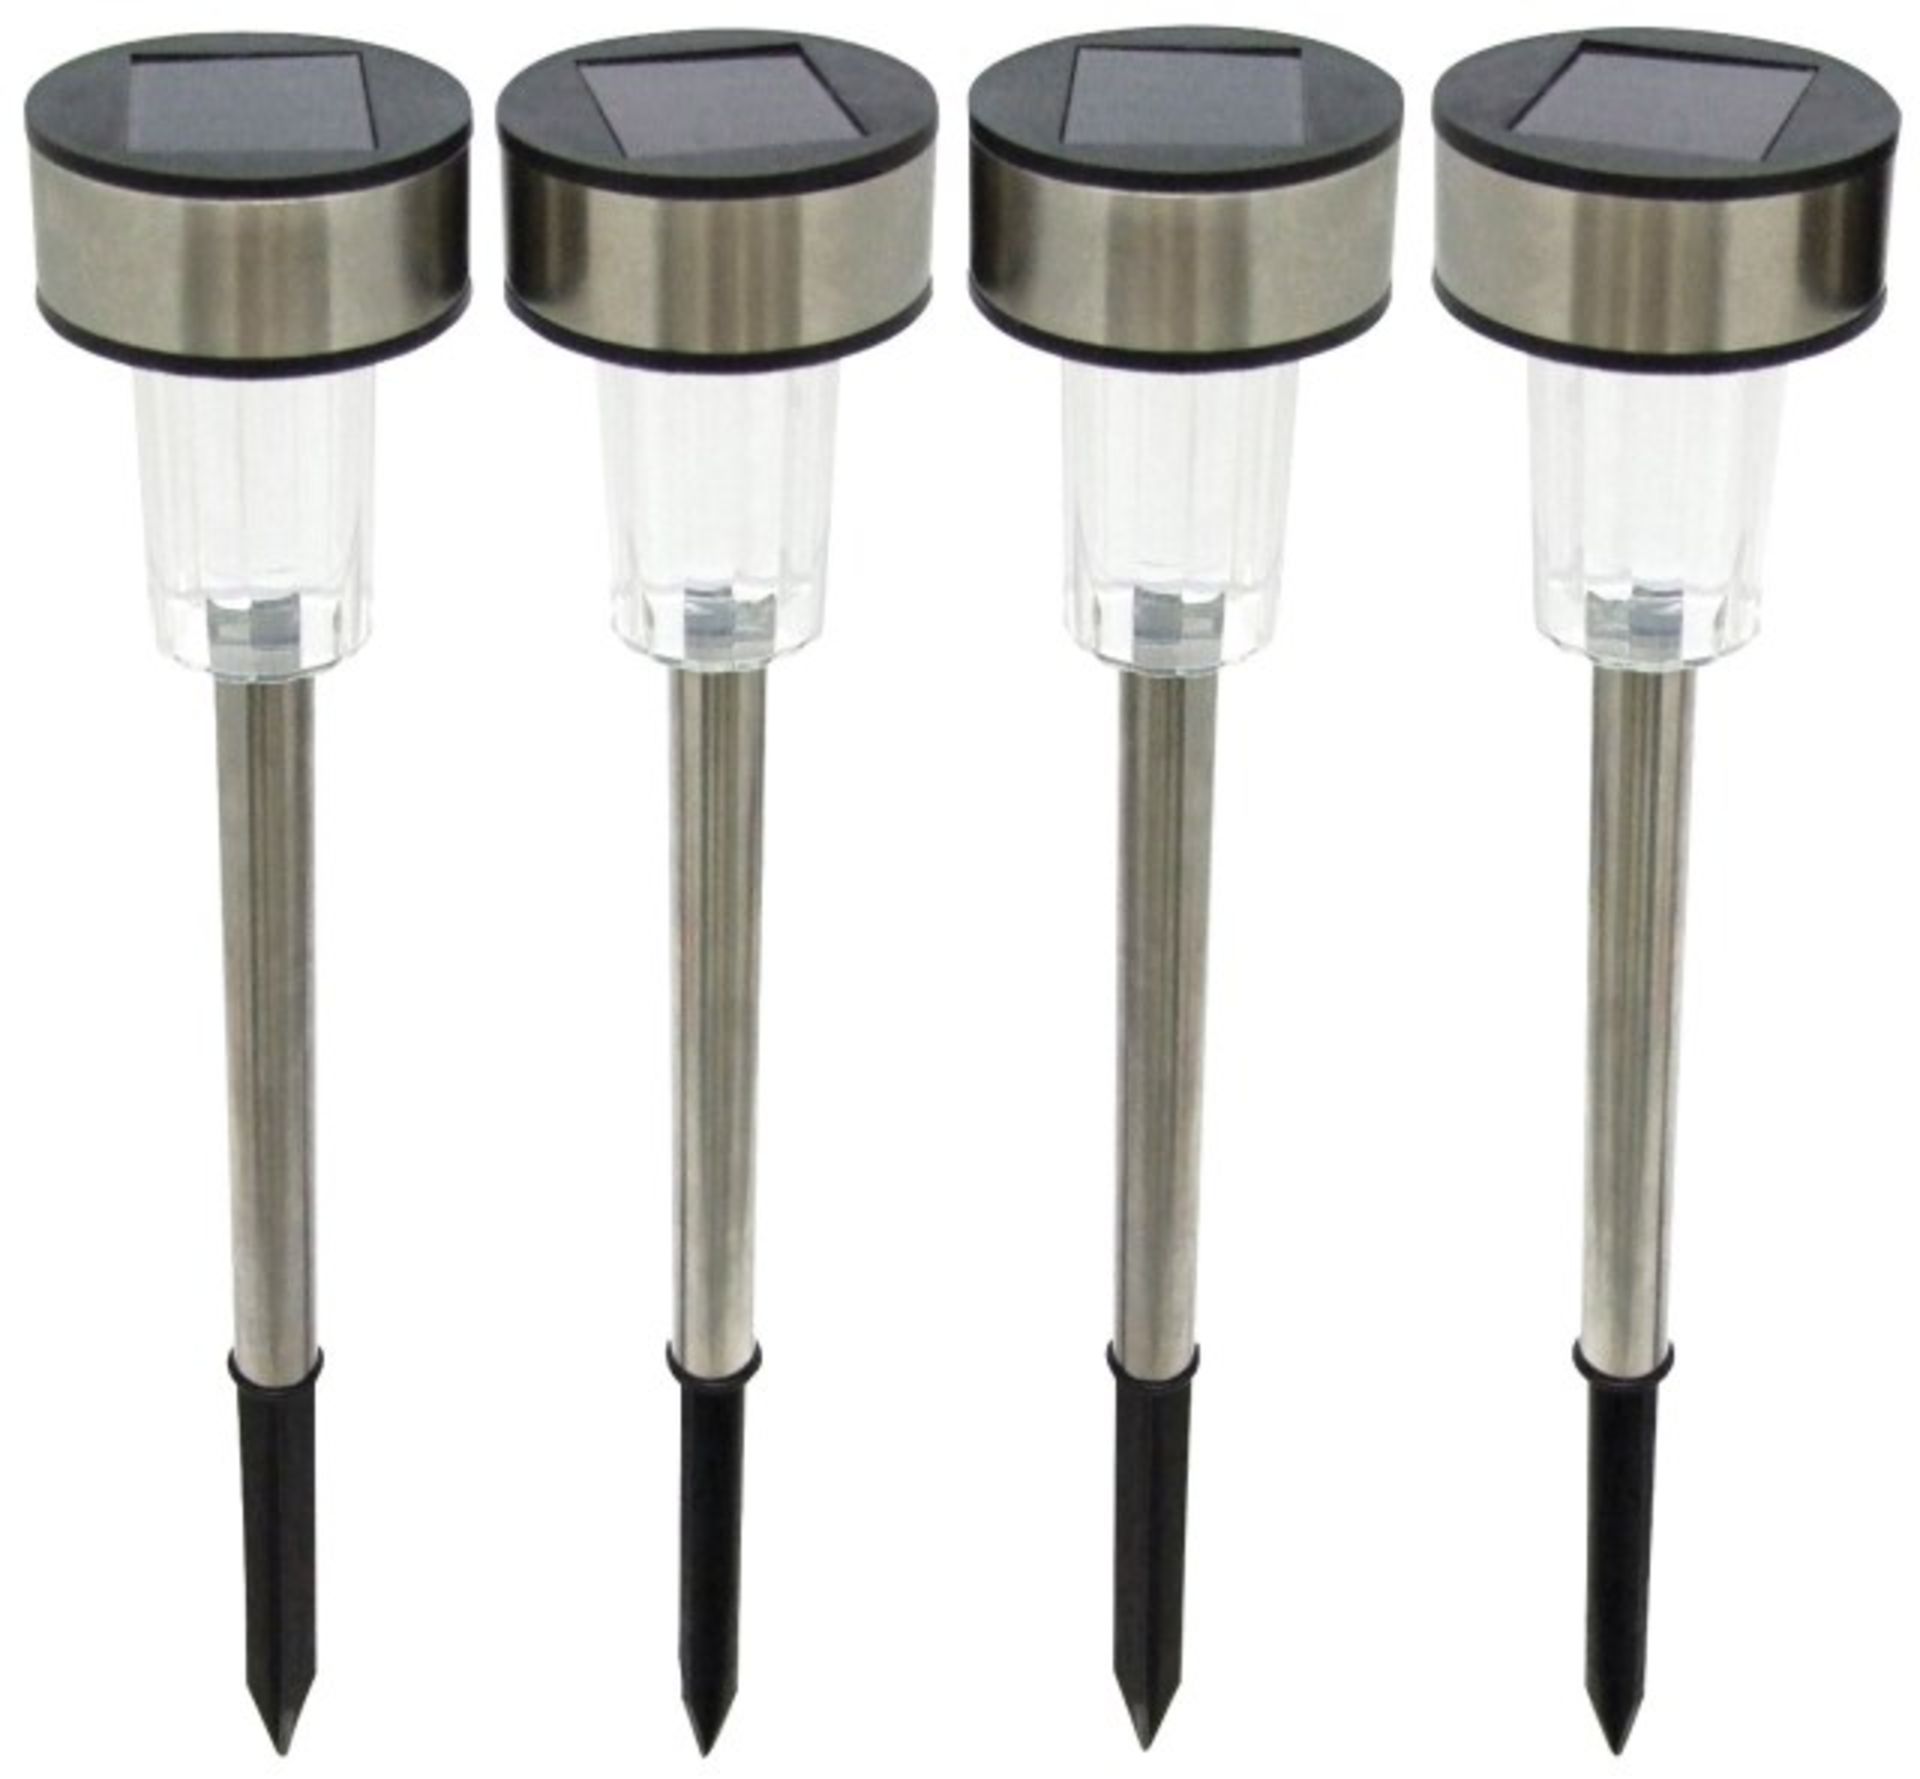 V Brand New Set Of 4 Kempton Stainless Steel Solar Lights X 2 YOUR BID PRICE TO BE MULTIPLIED BY